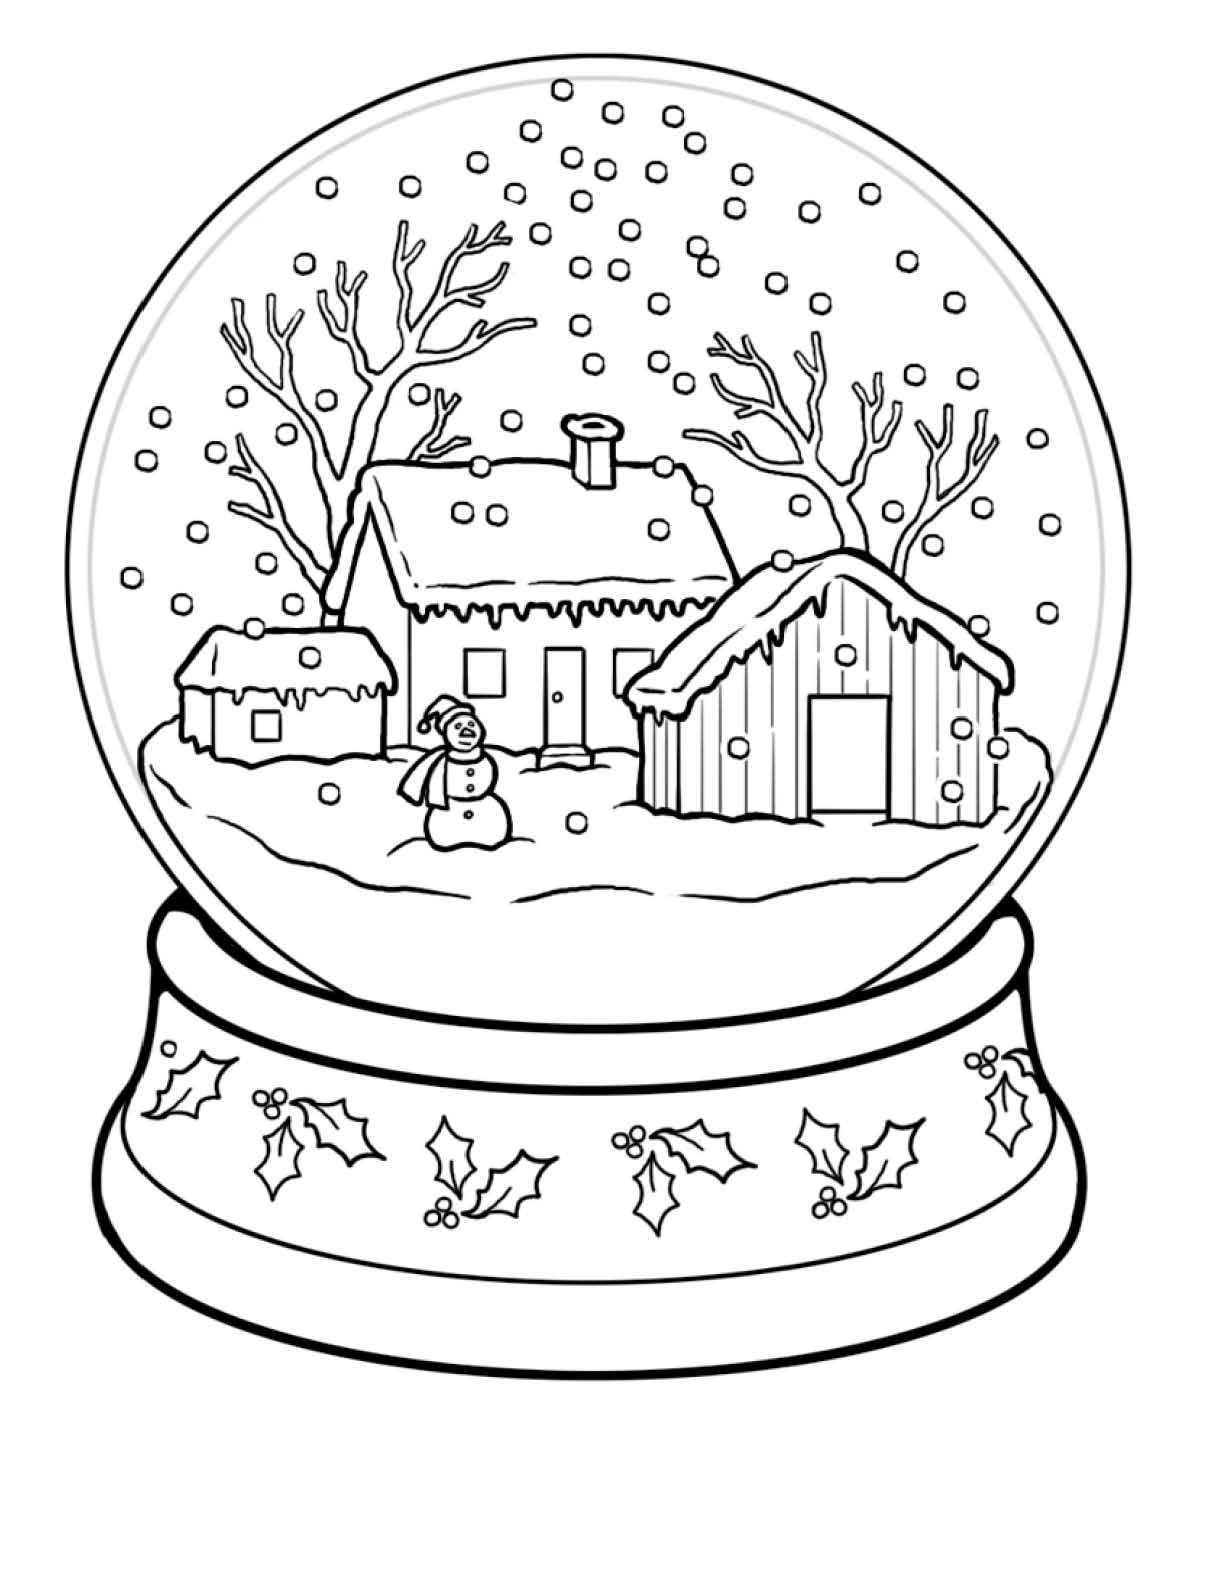 Winter Printable Coloring Pages : Pin on Backgrounds Free printable